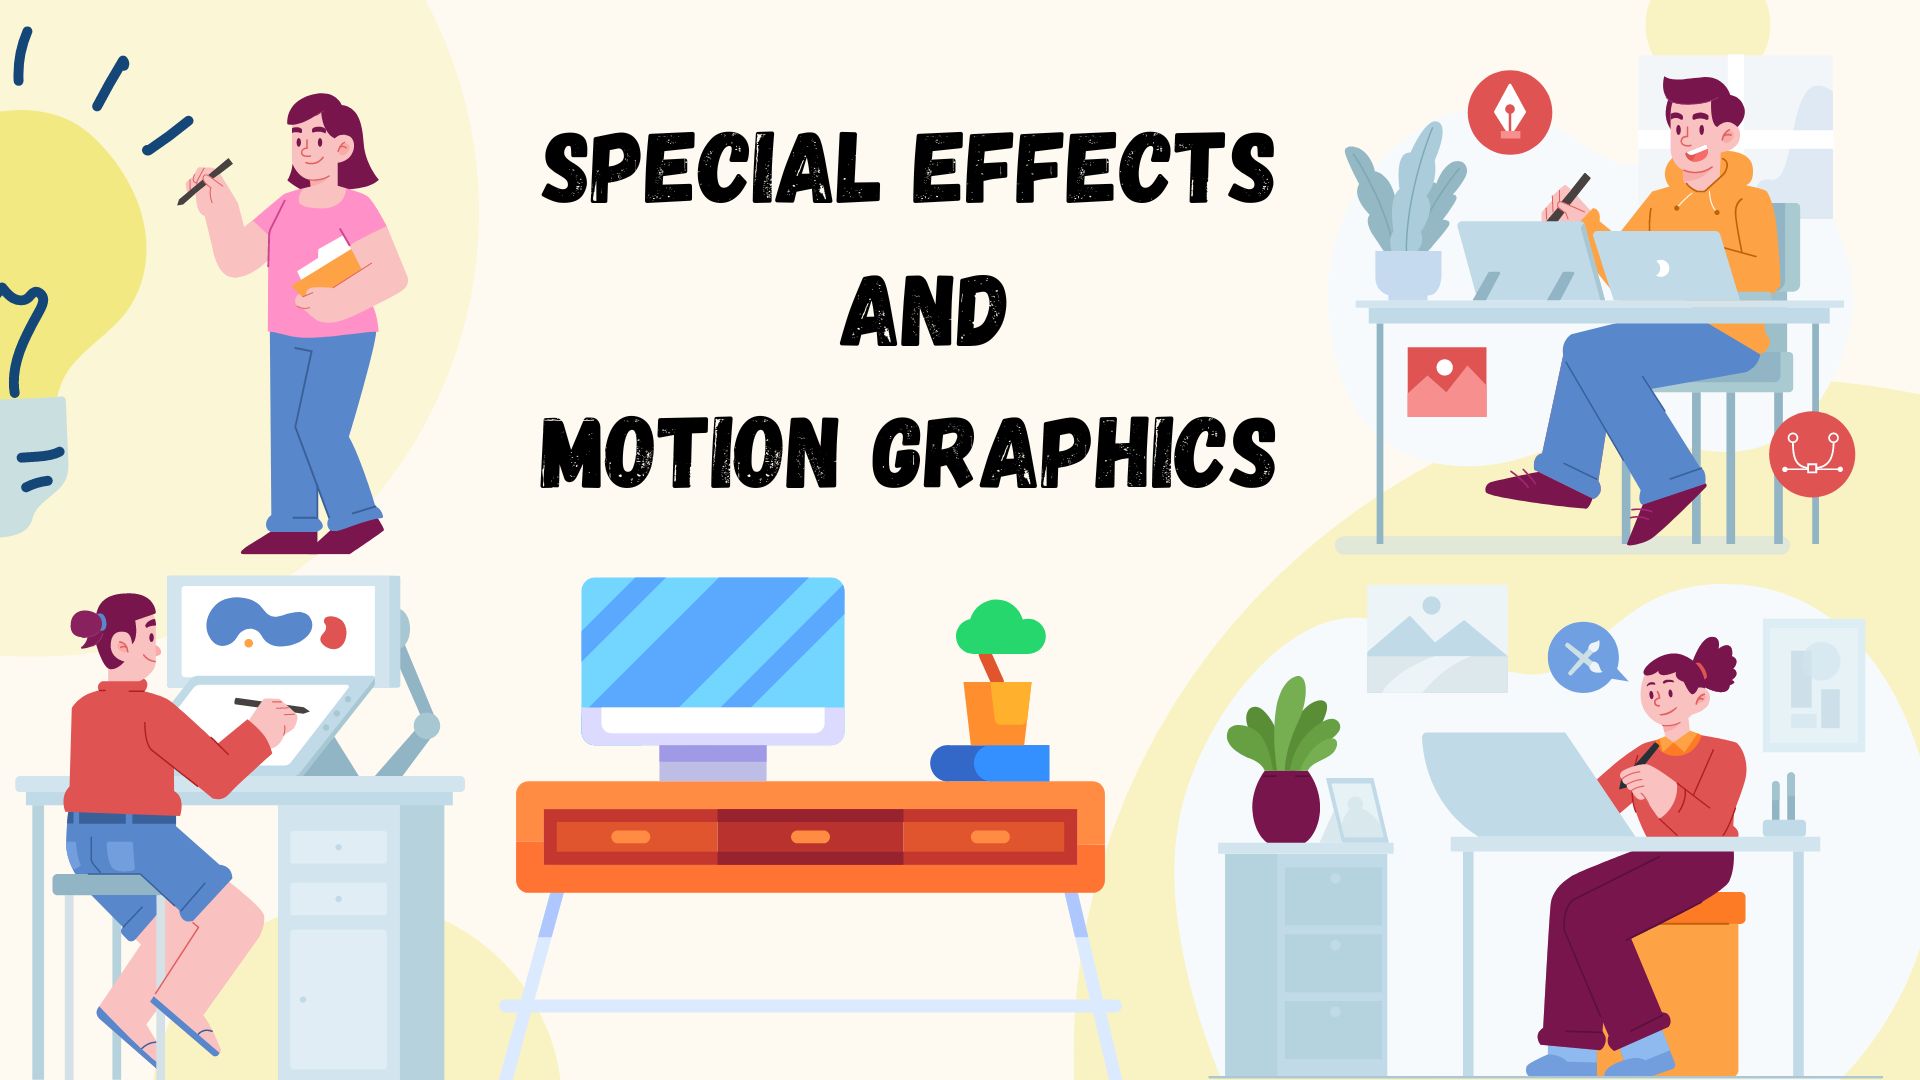 10 current trends for Animation and Motion design